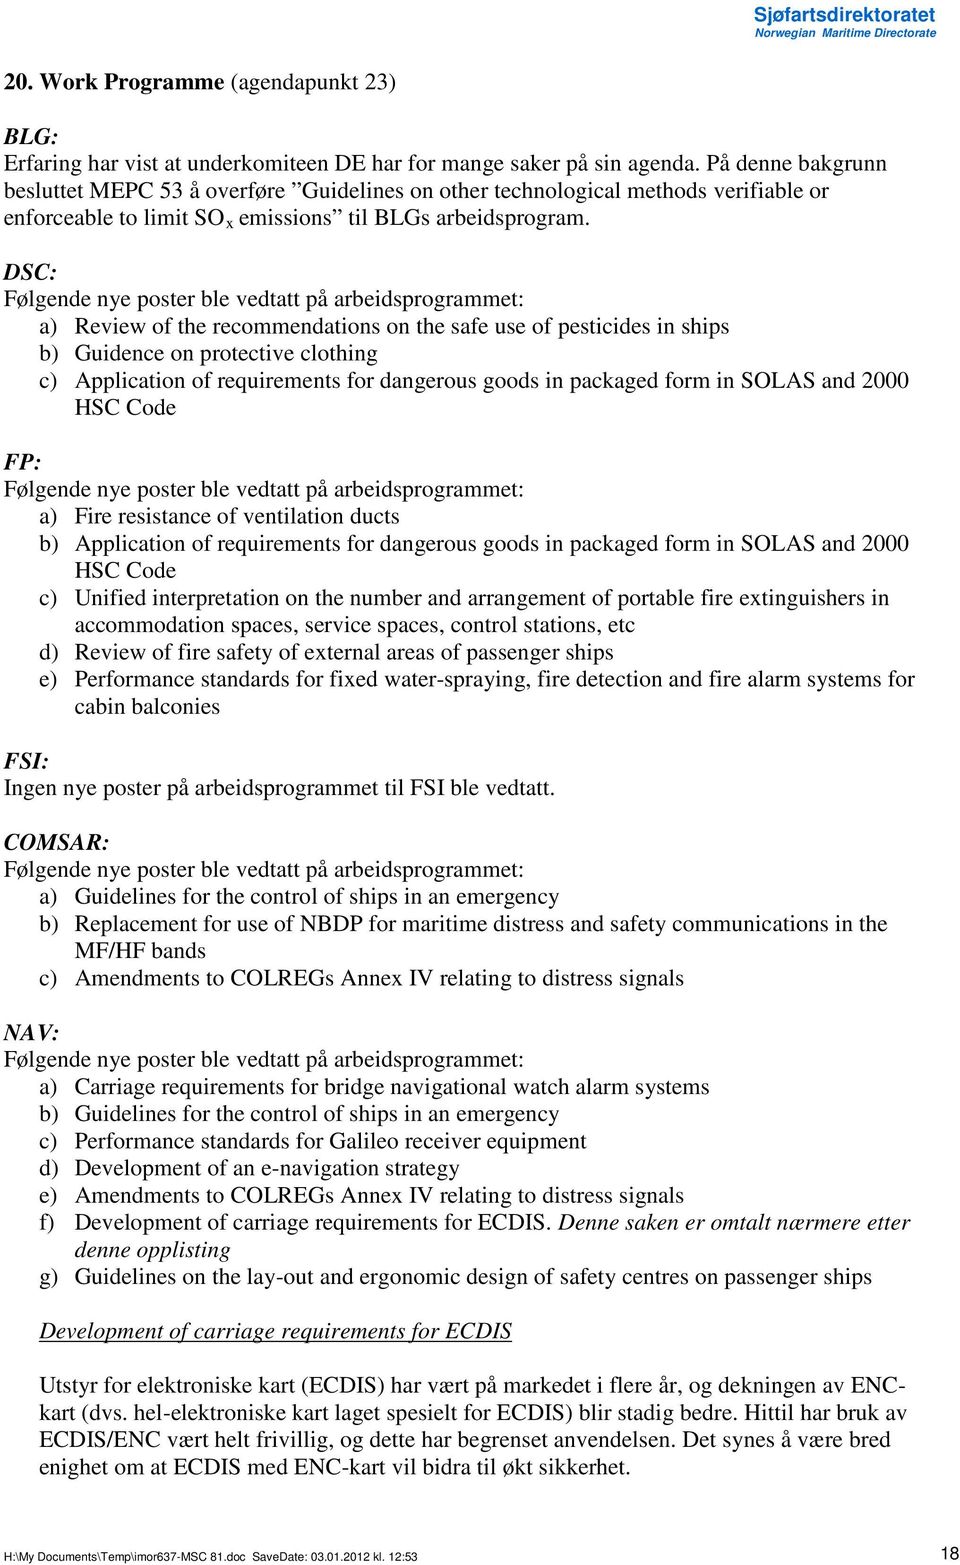 DSC: Følgende nye poster ble vedtatt på arbeidsprogrammet: a) Review of the recommendations on the safe use of pesticides in ships b) Guidence on protective clothing c) Application of requirements